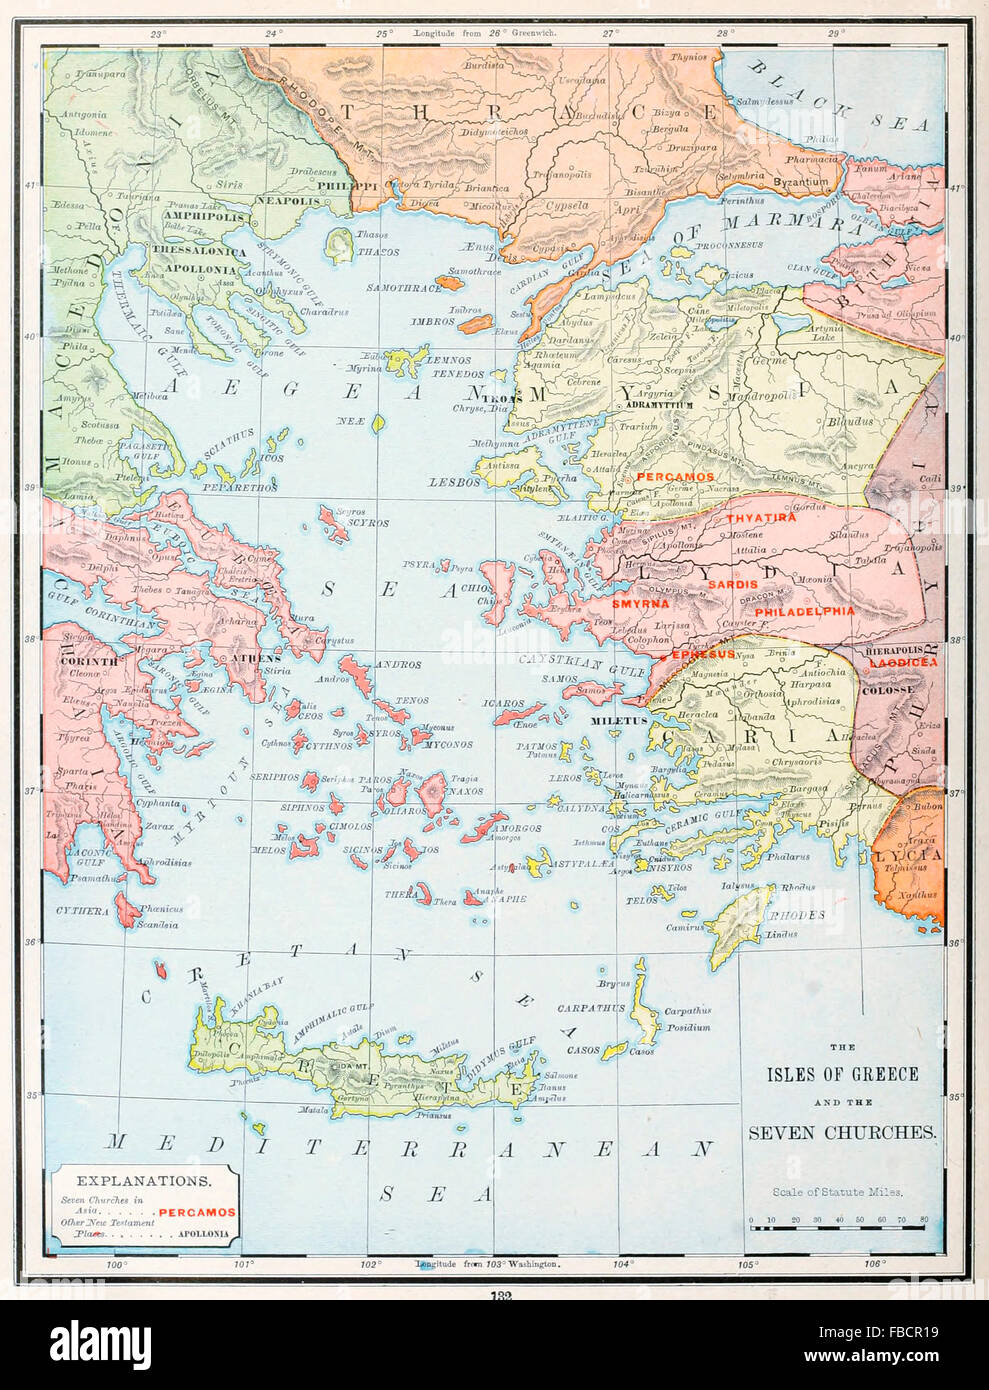 Map of the Isles of Greece and the Seven Churches - Early Christian Ministry Stock Photo